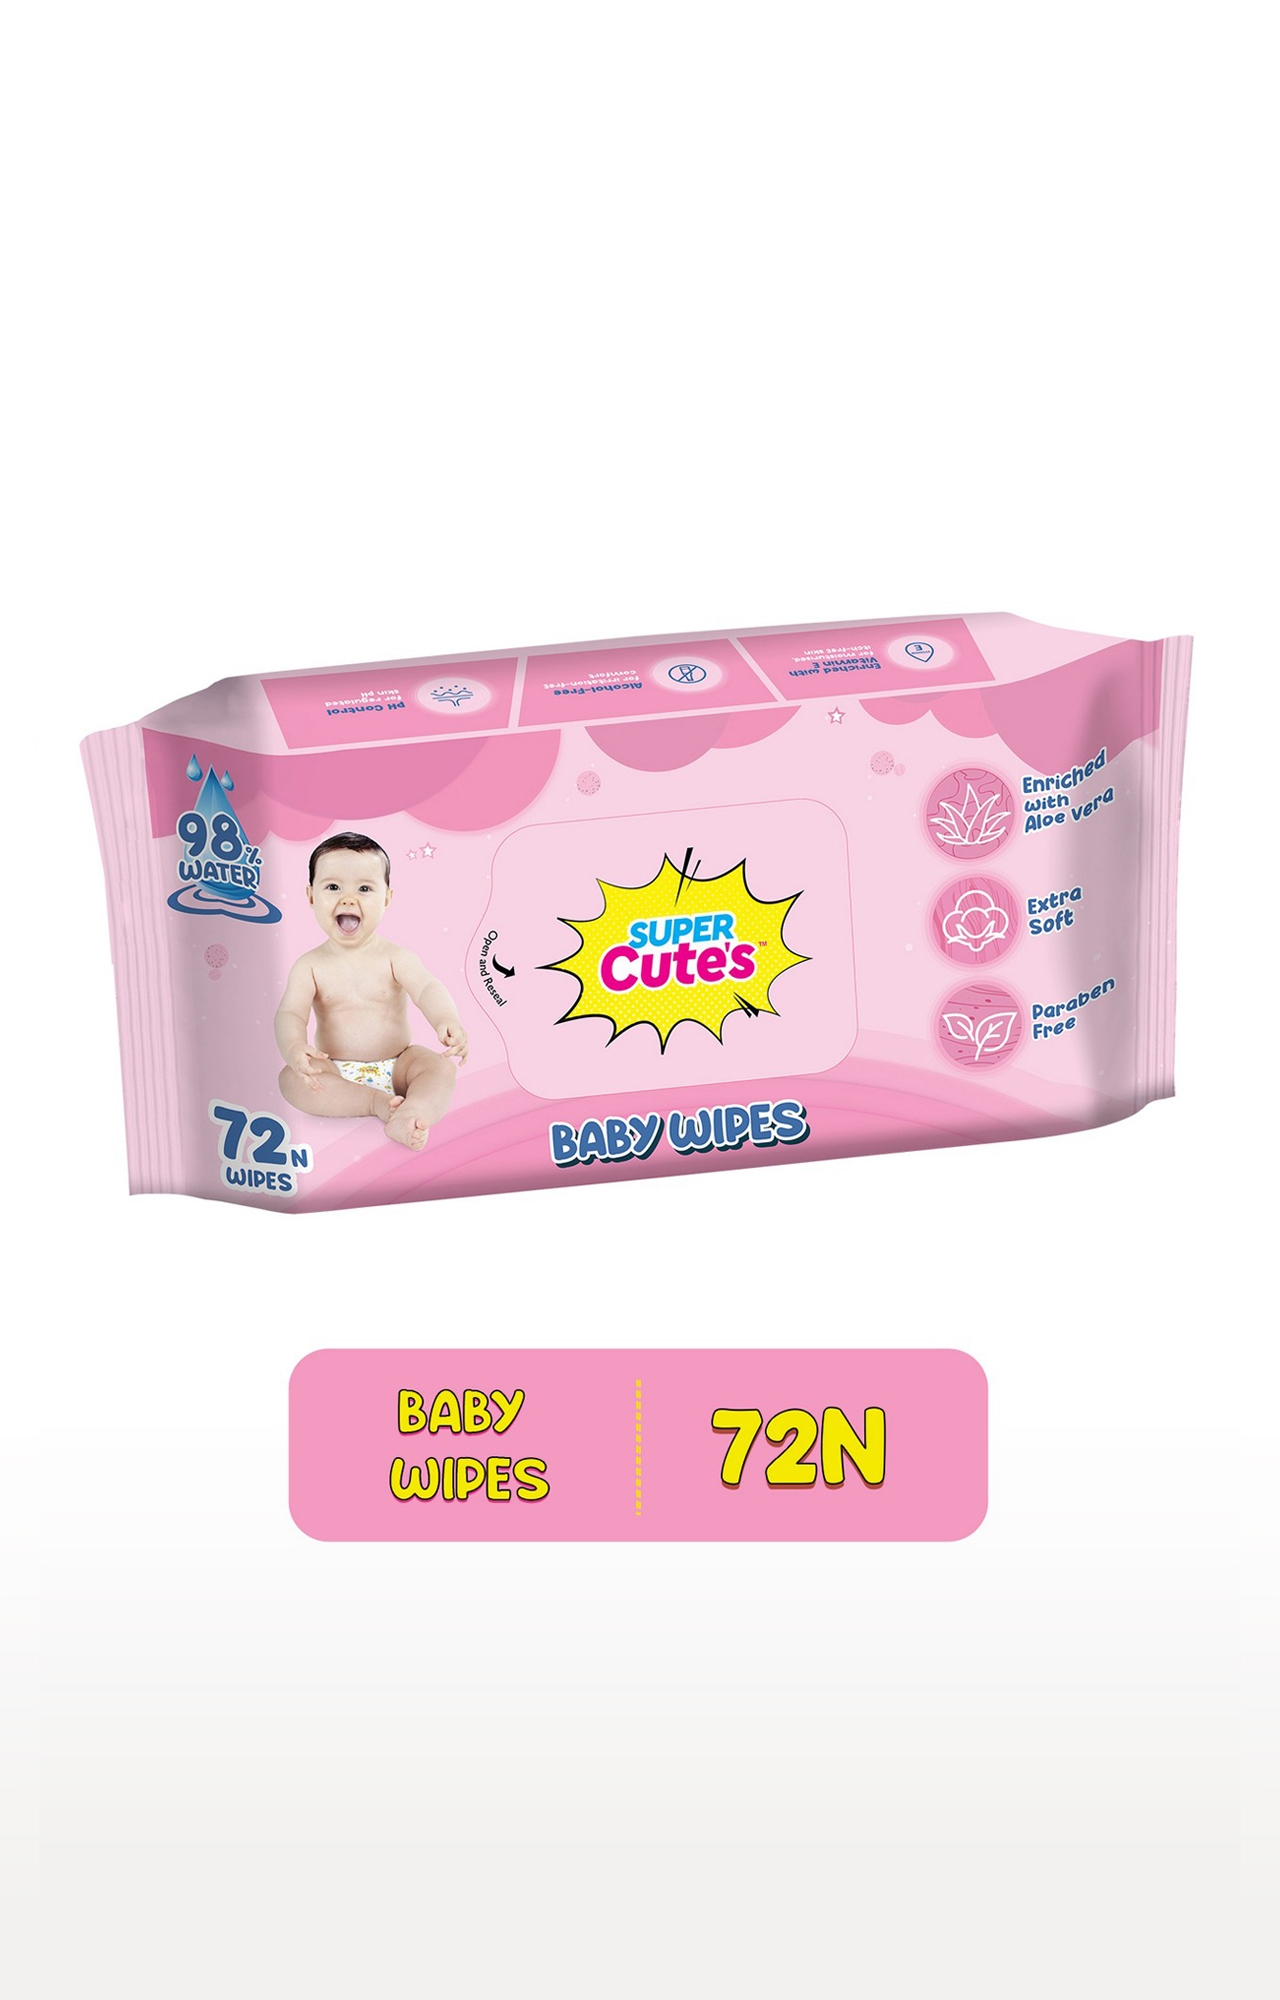 Super Cute's | Super Cute's Premium Soft Cleansing Baby Wipes With Aloe Vera, Enriched With Vitamin E, And Paraben Free - 72 Wipes